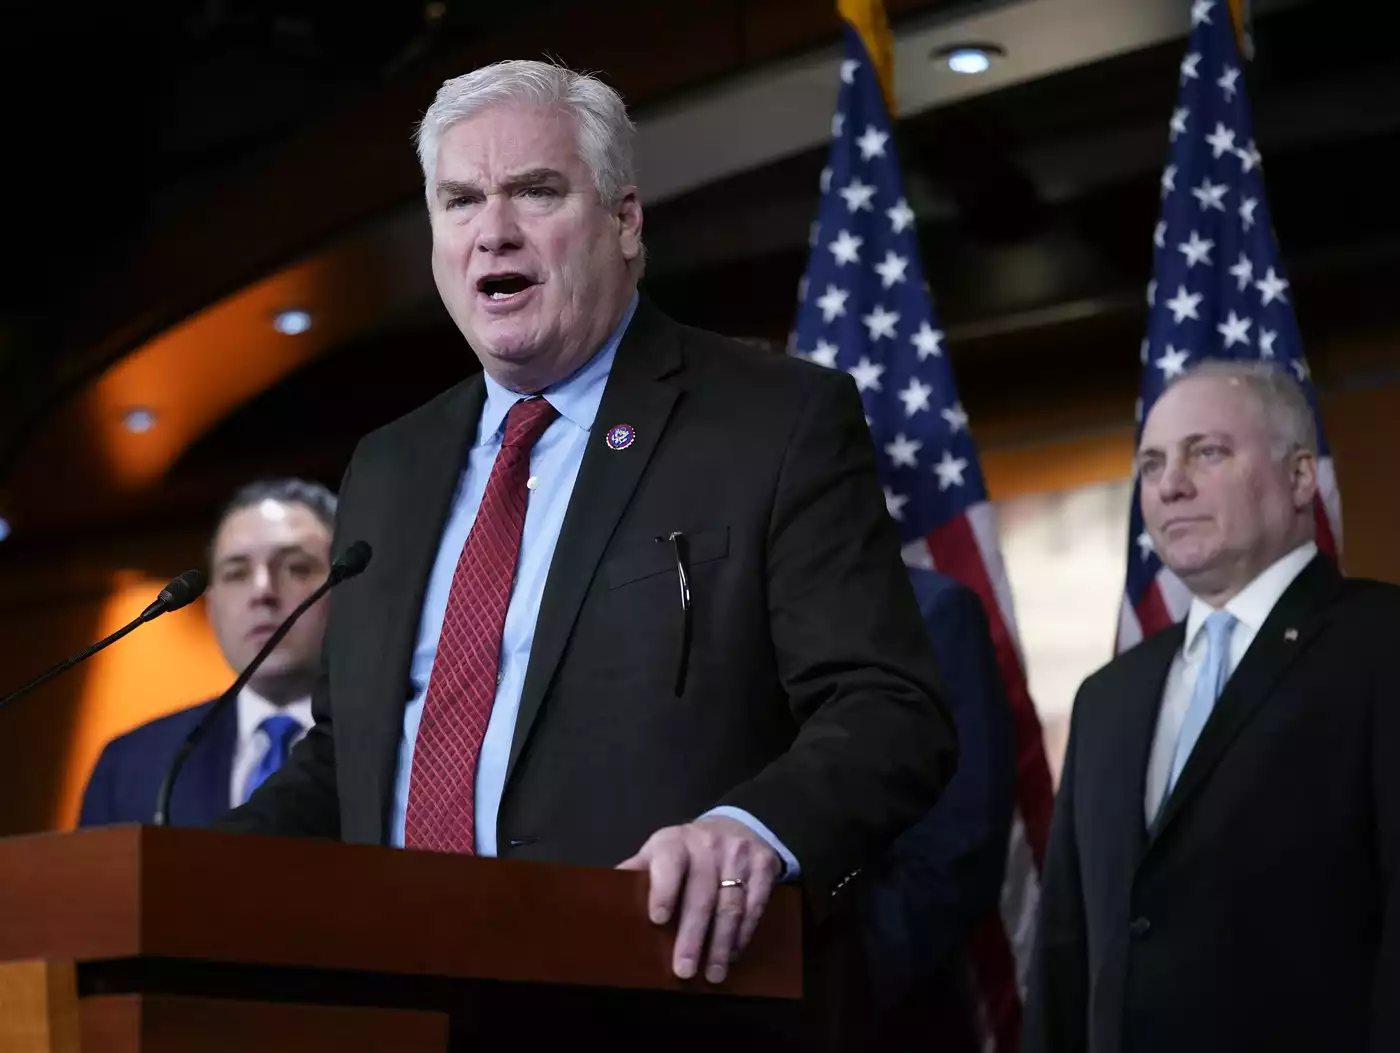 Tom Emmer withdraws bid for House speaker hours after winning nomination, leaving new cycle of chaos